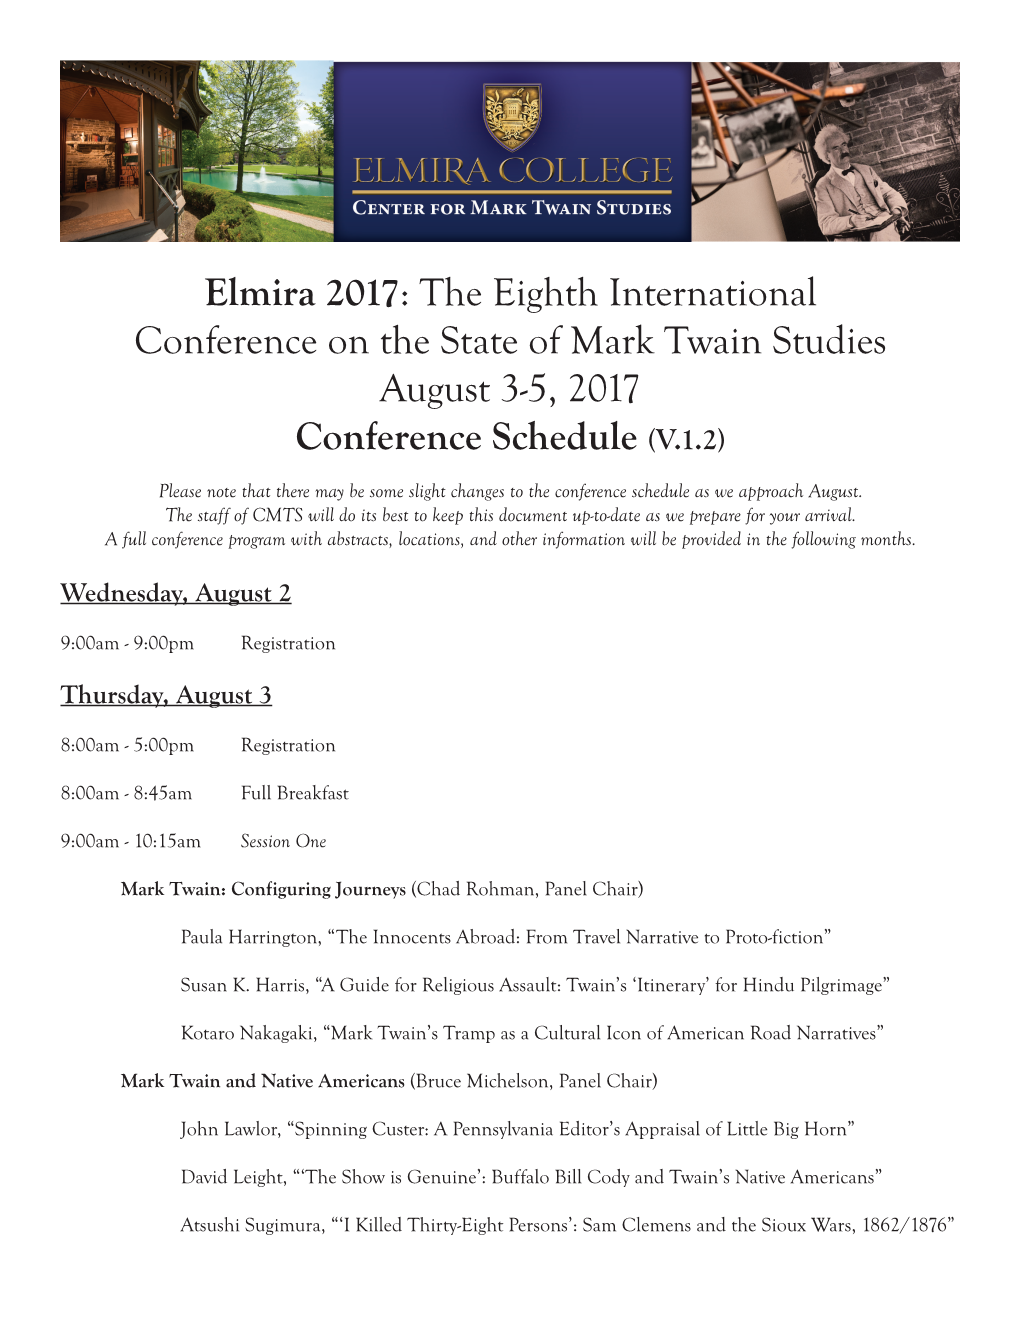 Elmira 2017: the Eighth International Conference on the State of Mark Twain Studies August 3-5, 2017 Conference Schedule (V.1.2)